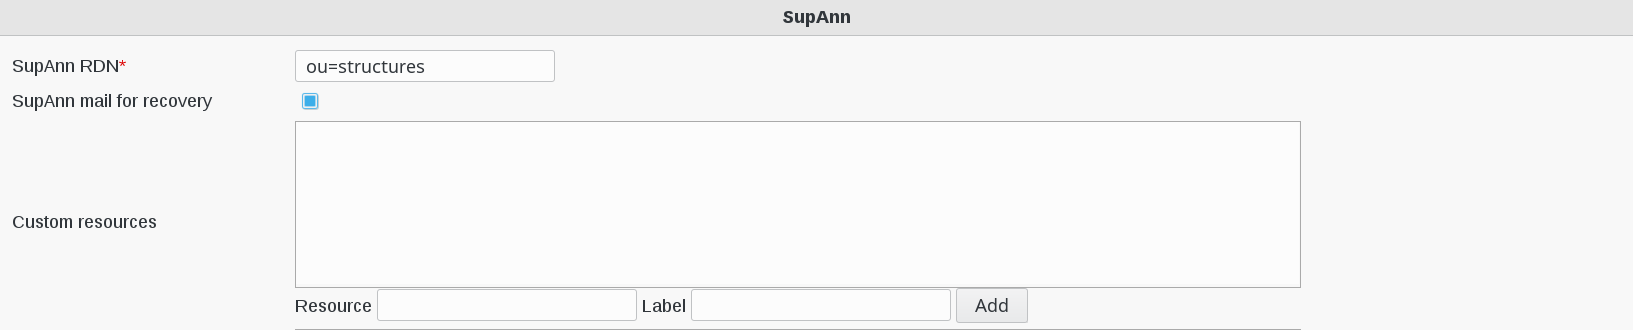 Picture of SupAnn configuration menu_1 in FusionDirectory